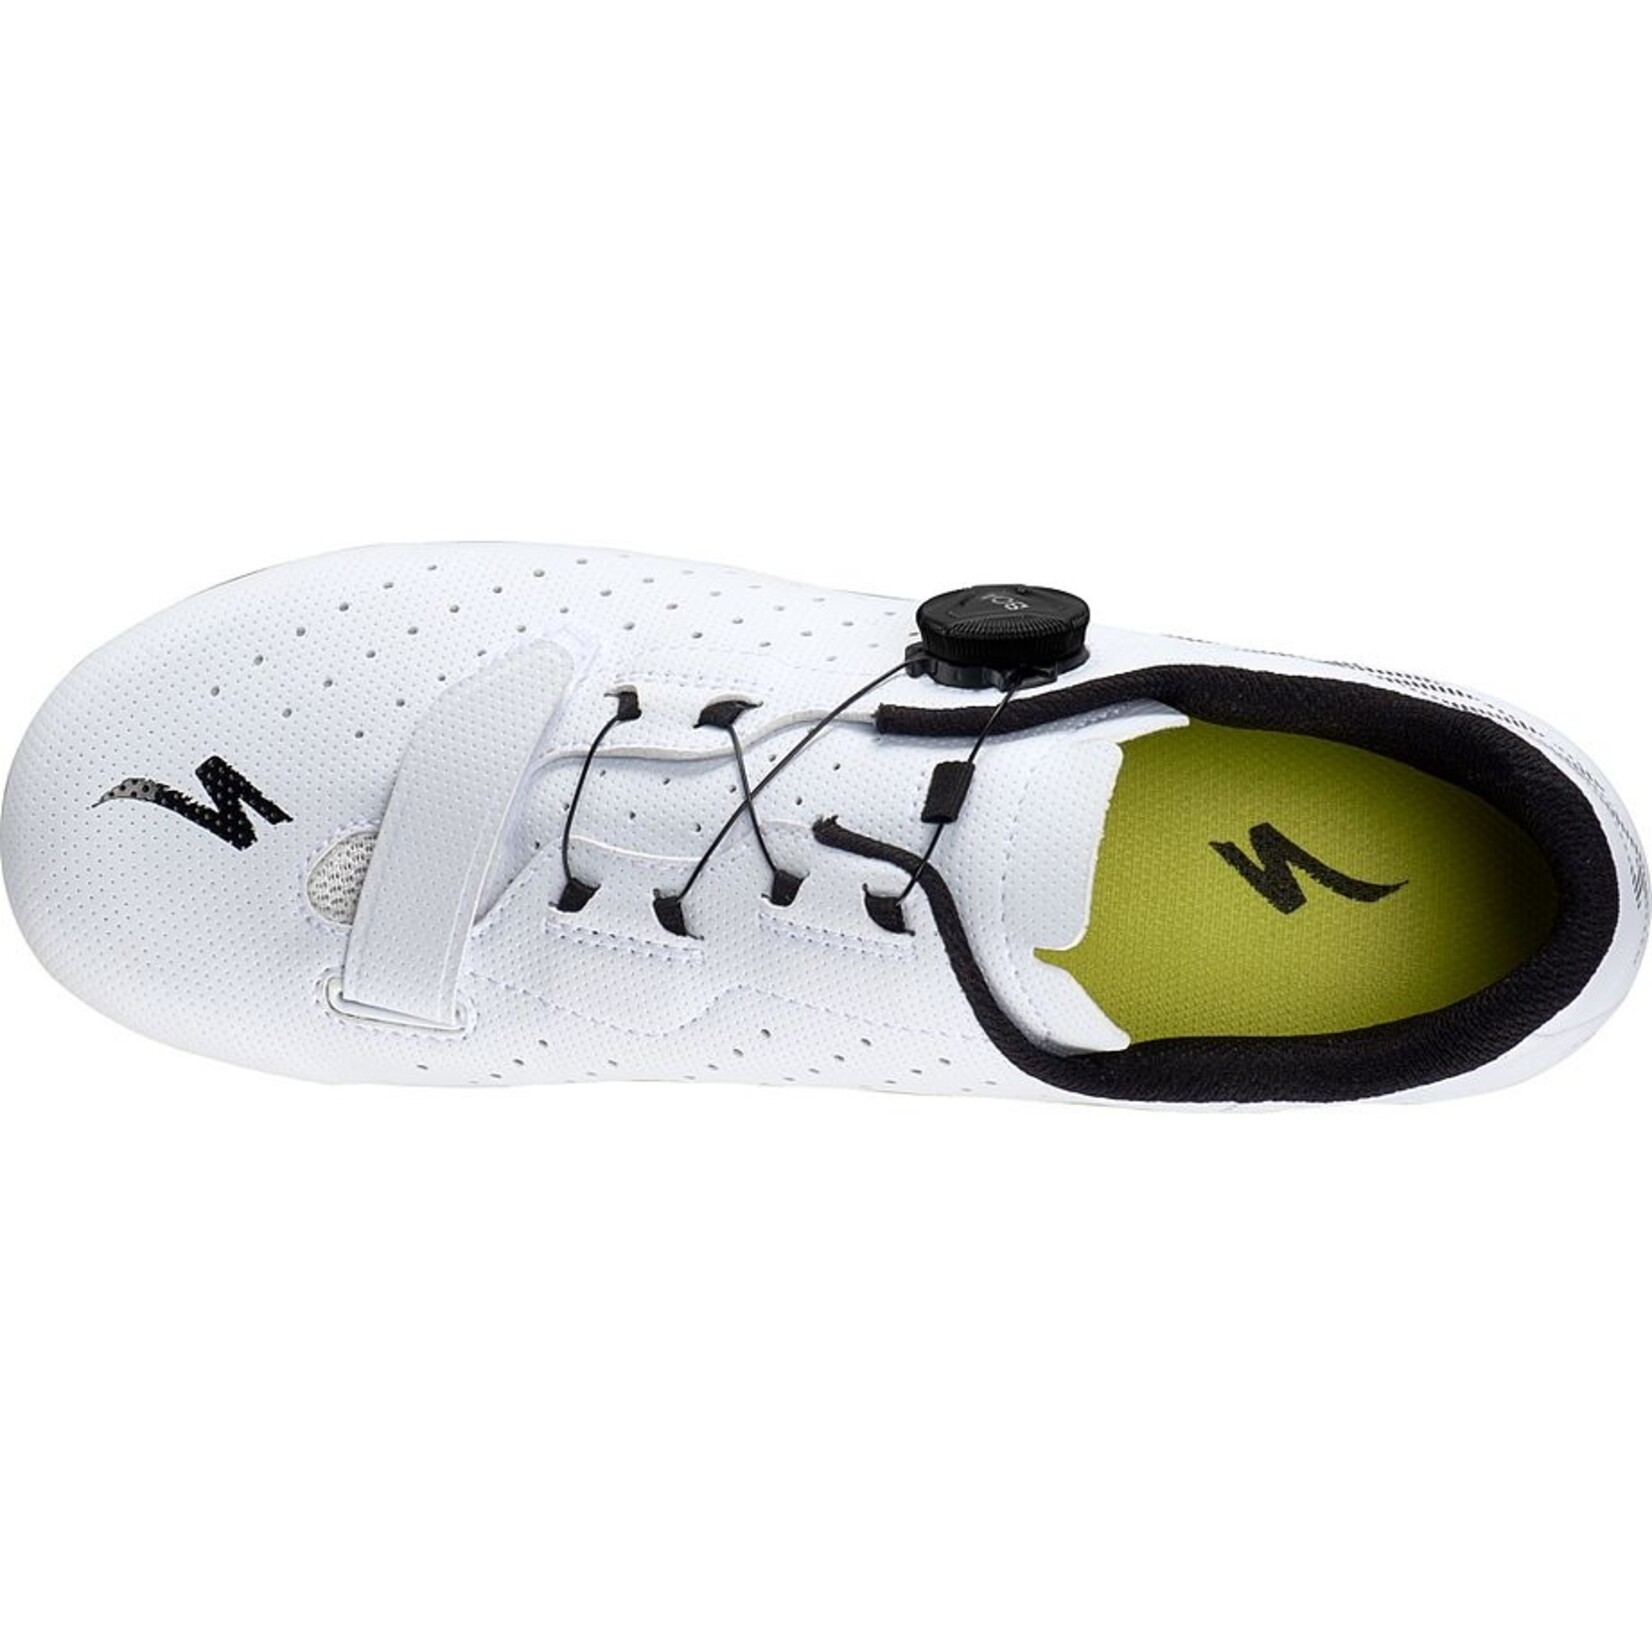 Specialized Torch 1.0 Road Shoes in White